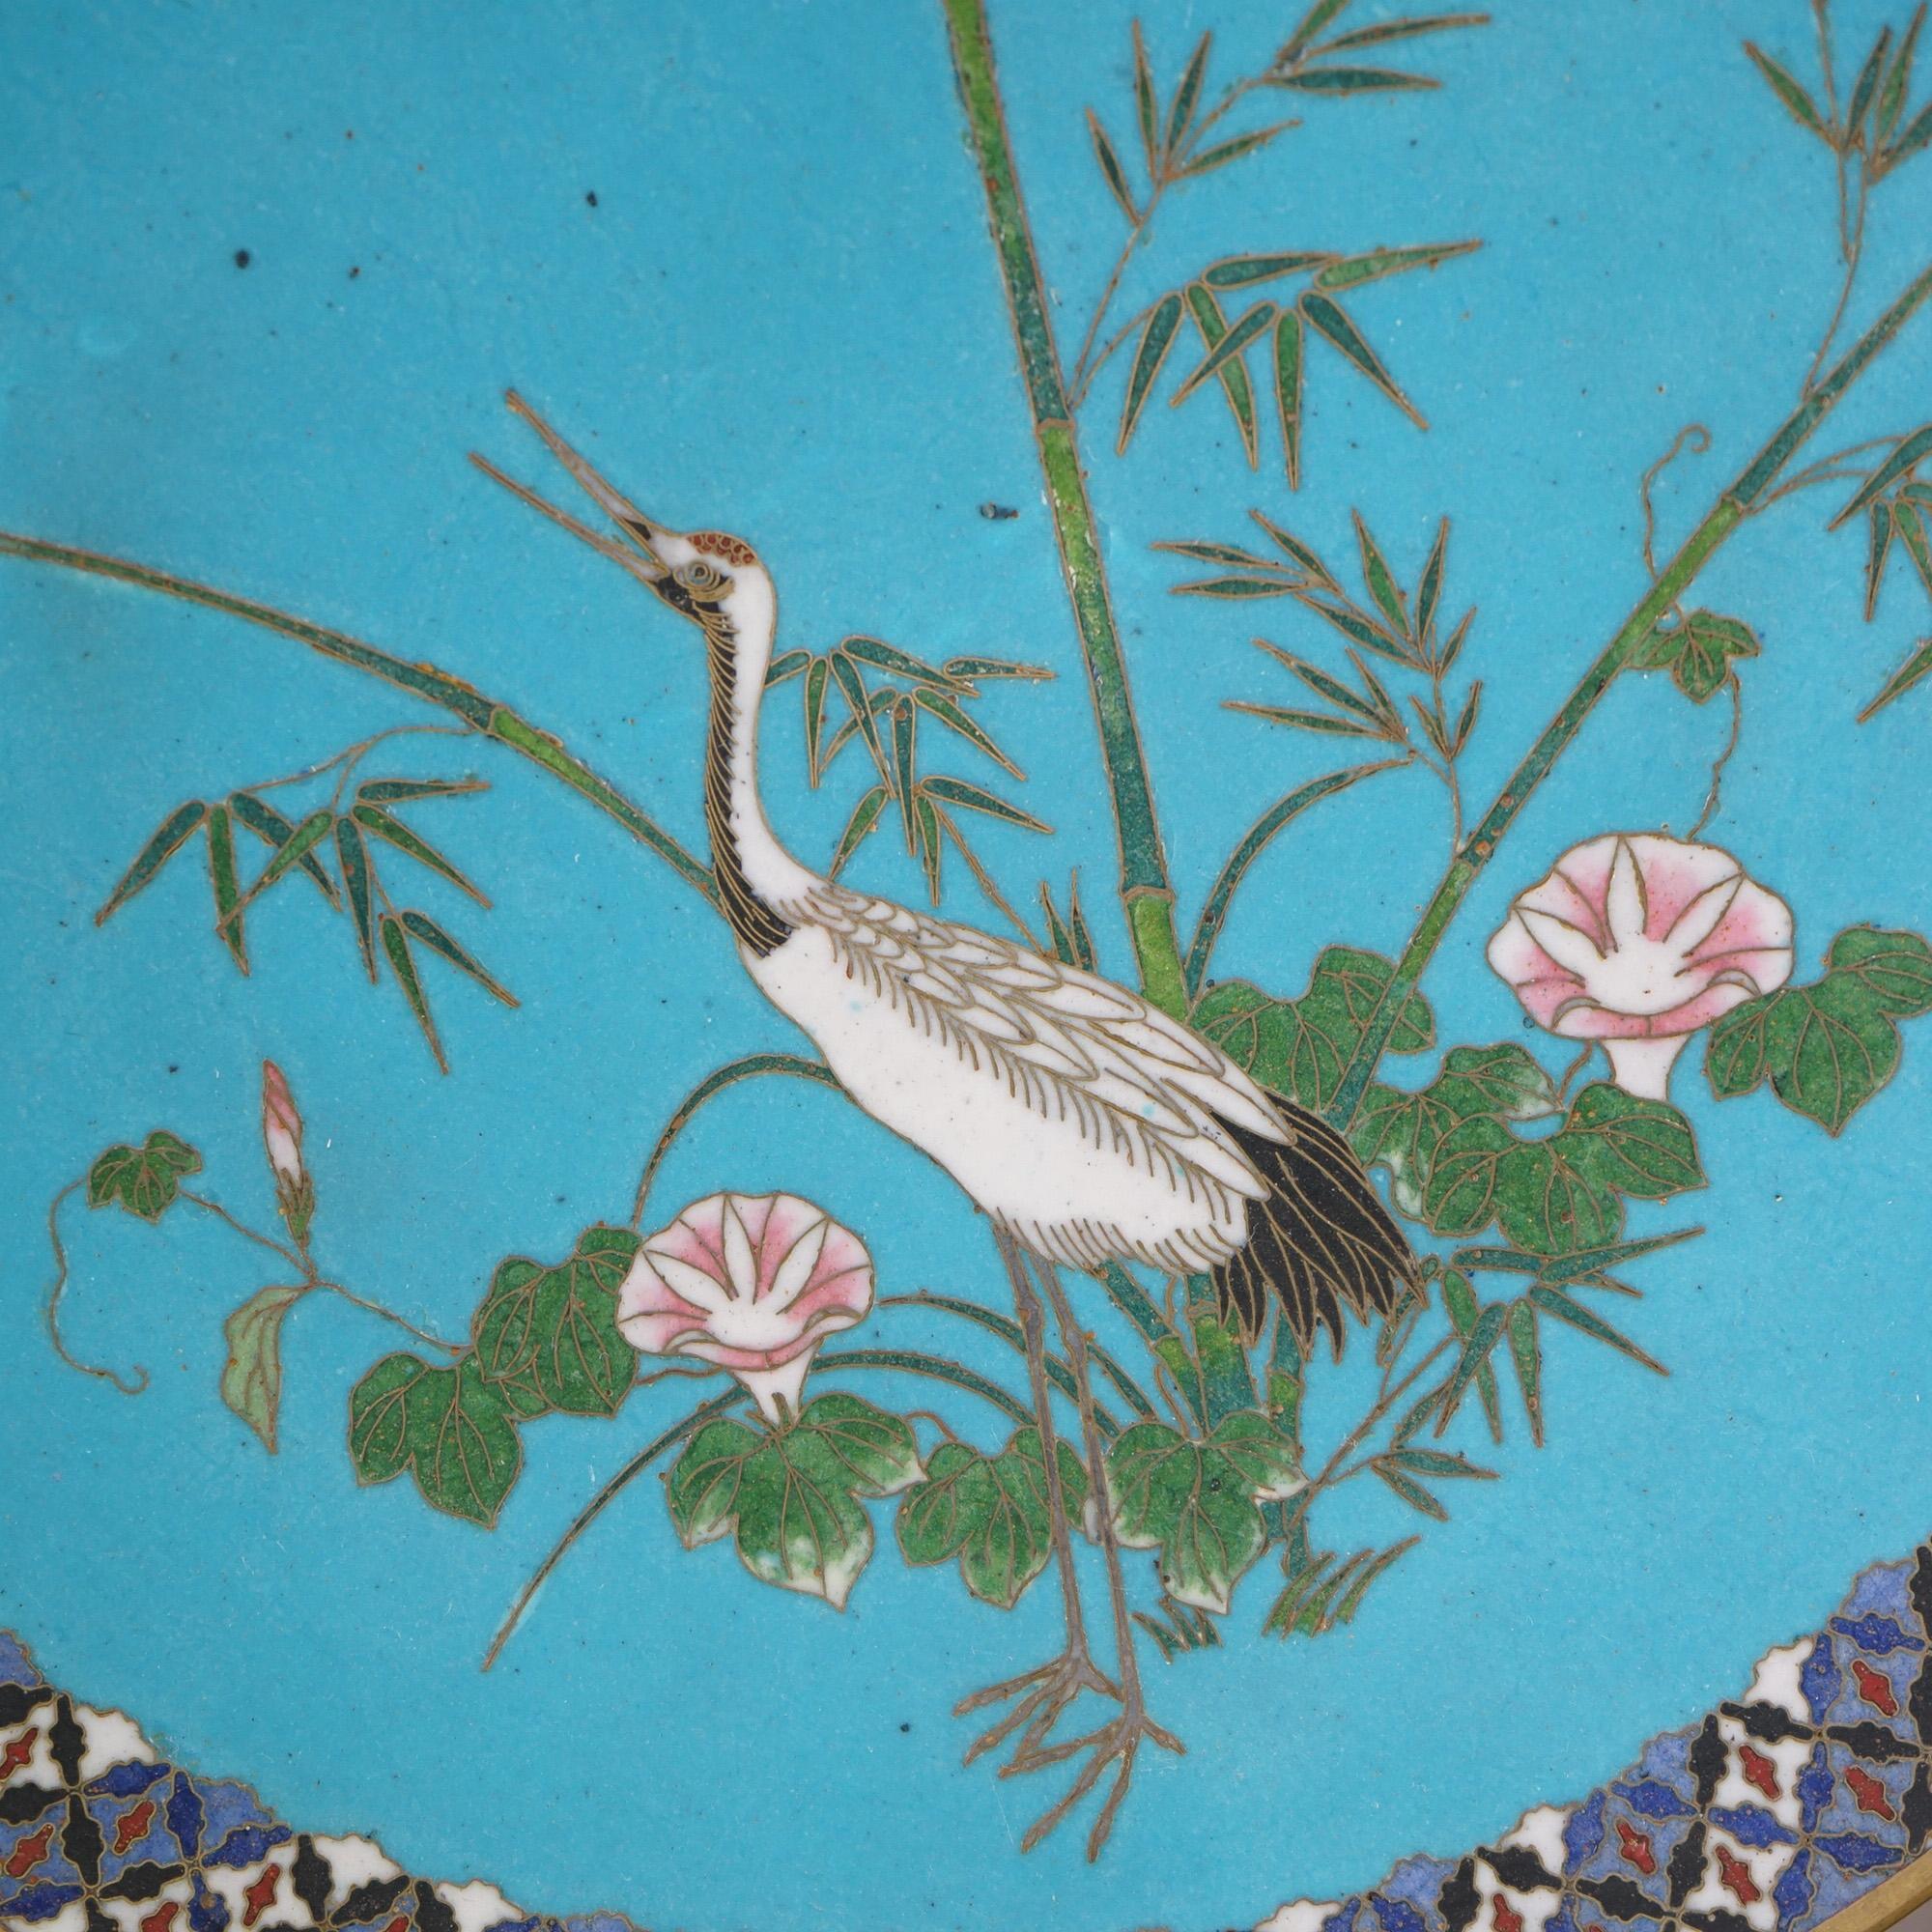 Japanese Meiji Cloisonne Enameled Figural Charger With Marsh Scene & Heron 20thC In Good Condition For Sale In Big Flats, NY